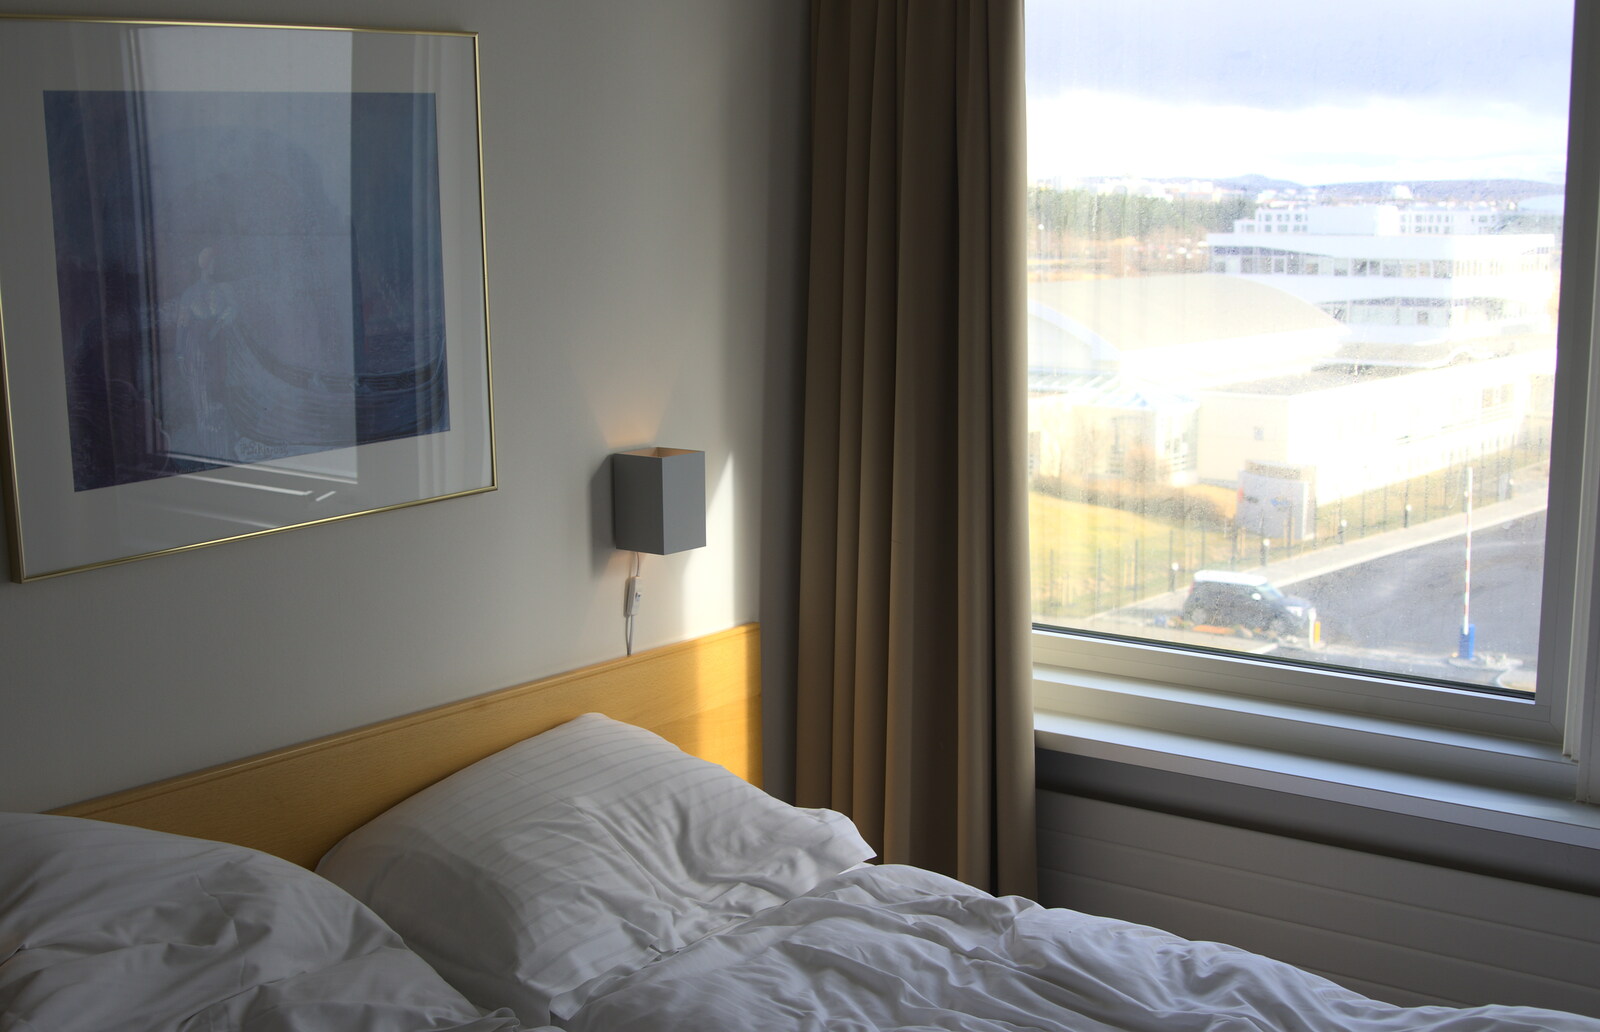 Our hotel room from A Trip to Reykjavik, Iceland - 20th April 2017